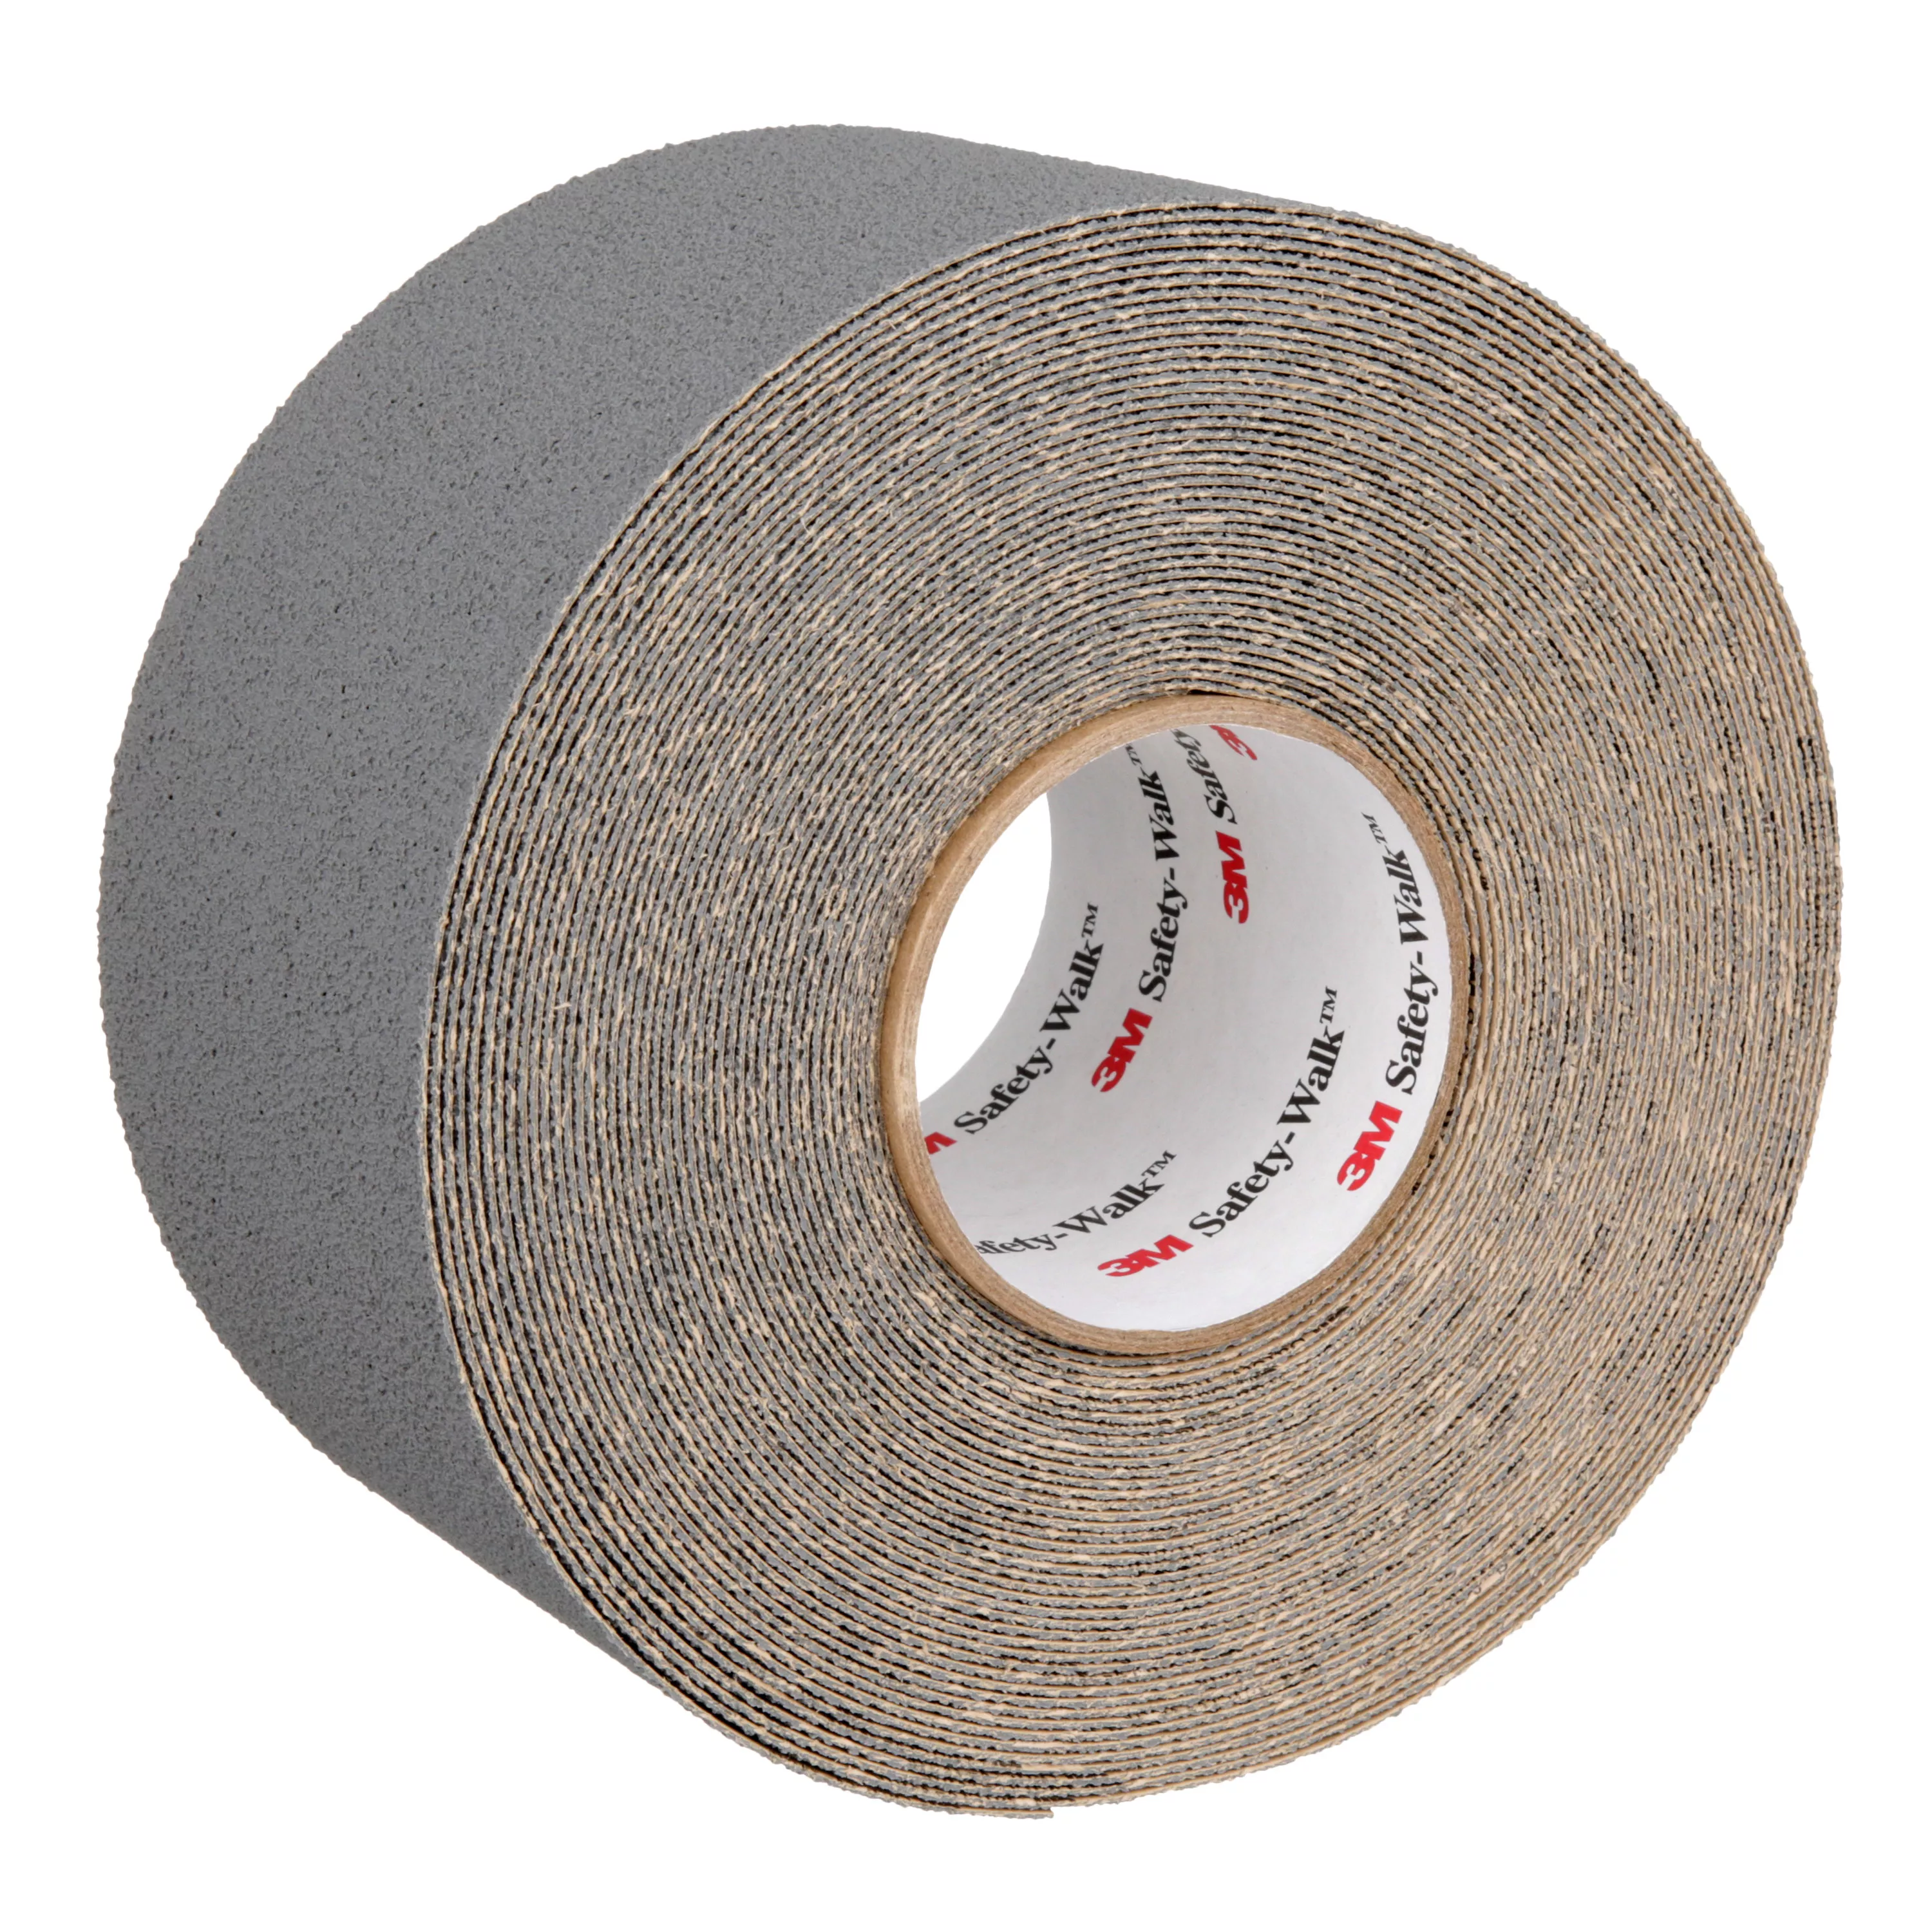 3M™ Safety-Walk™ Slip-Resistant Medium Resilient Tapes & Treads 370,
Gray, 4 in x 60 ft, Roll, 1/Case